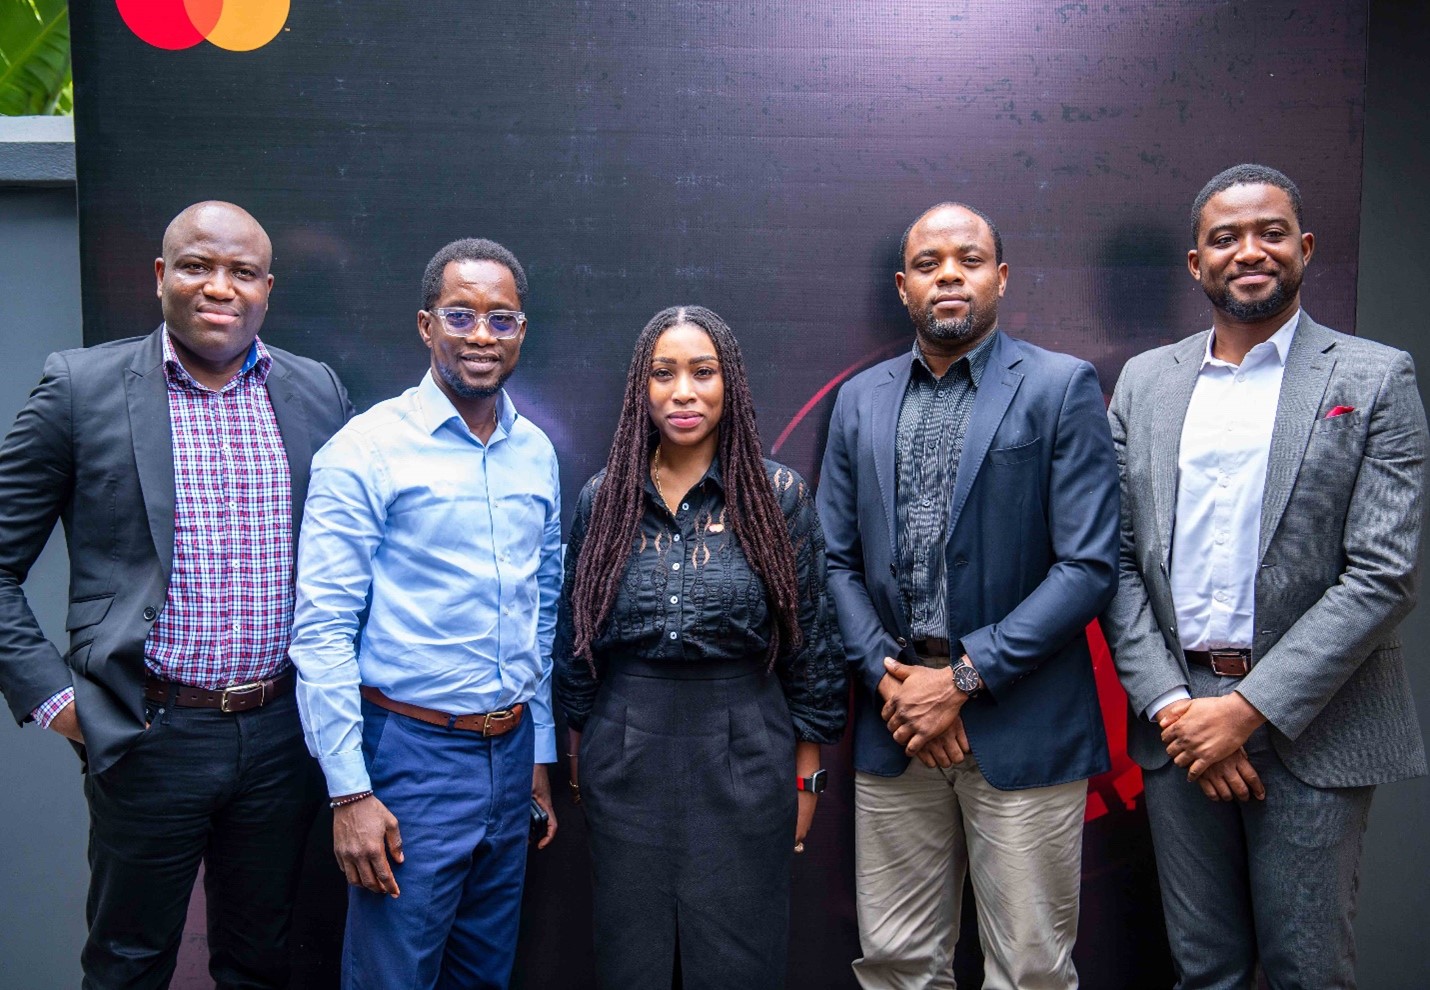 L-R: Temitope Onibaniyi, Secretary, Emerging Payments, Committee of e-Business Industry Heads (CeBIH), Kingsley Iyanu, Secretary, Publicity and Advocacy, CeBIH; Kari Tukur, Vice President, Customer Solutions Center, East & West Africa, Mastercard; Oscar Muomah, Member, CeBIH, and Sunday Olaniyan, Member, CeBIH, at the Mastercard Fraud & Cyber Resilience Forum in Lagos on April 18, 2024.